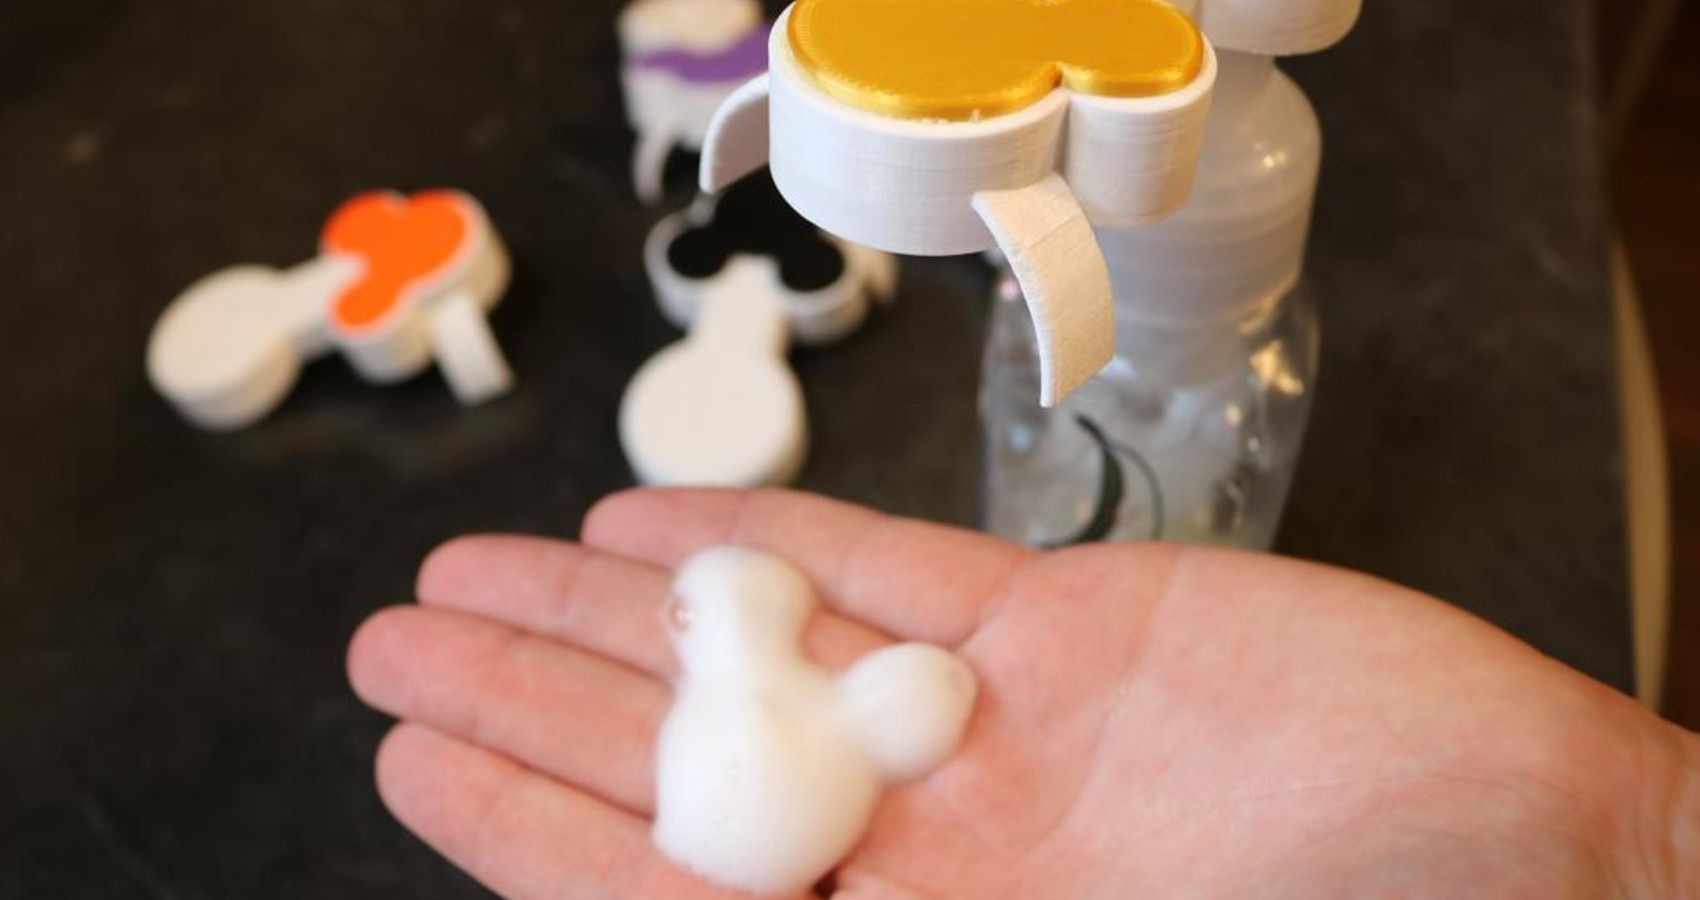 A soap dispenser that gives soap in the shape of Mickey Mouse